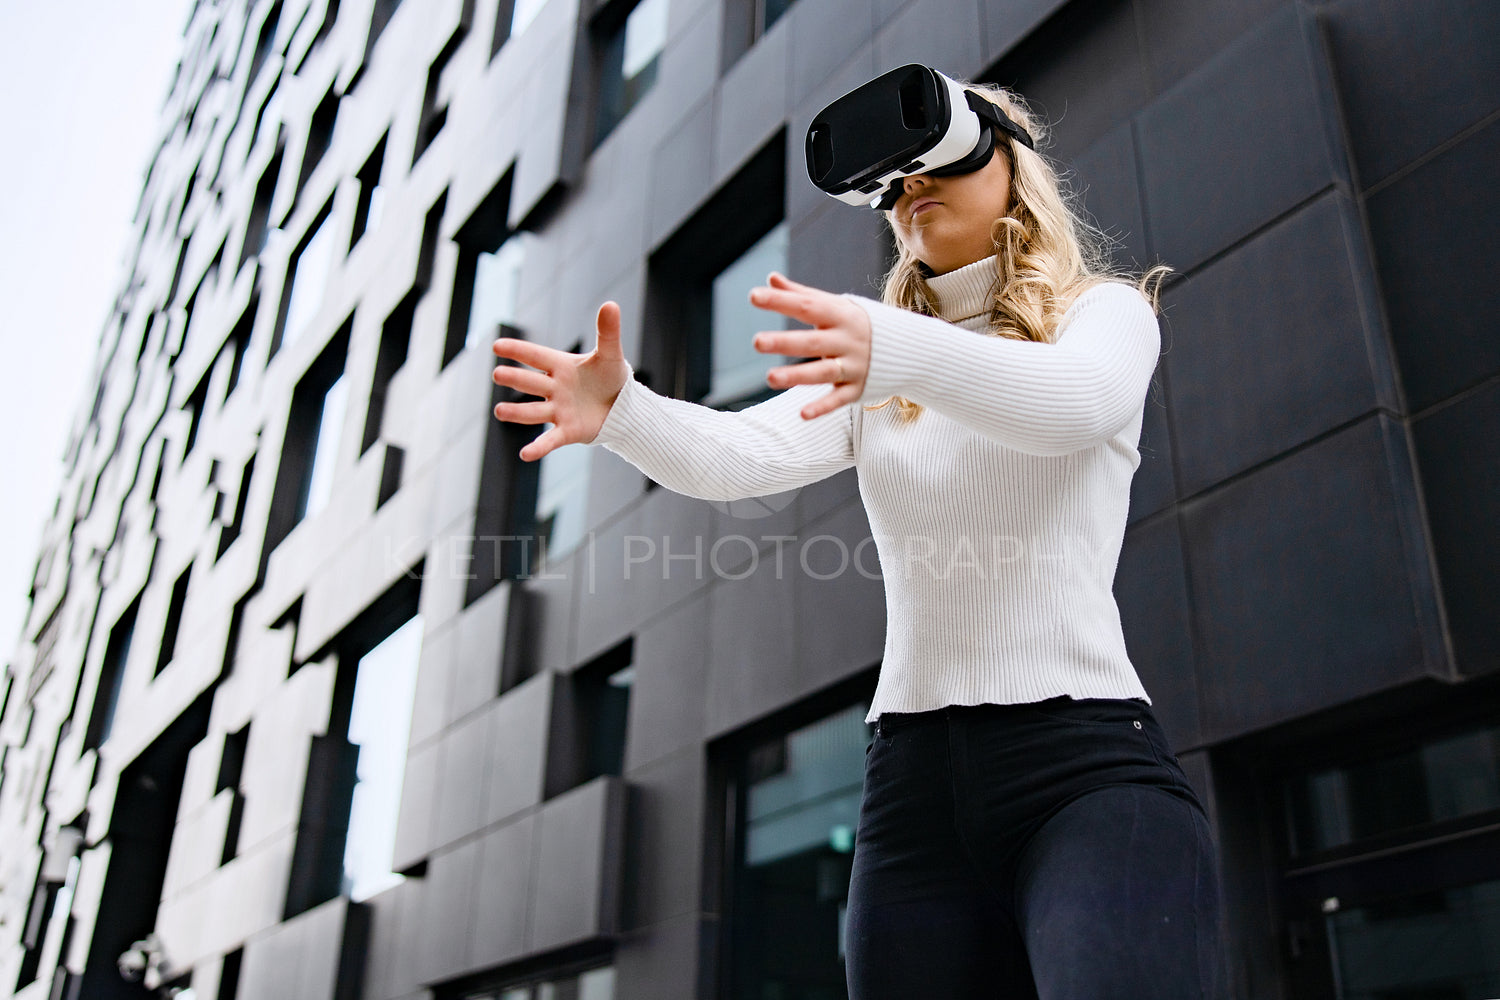 Woman Wearing VR Glasses In Front Of Urban Looking City Building